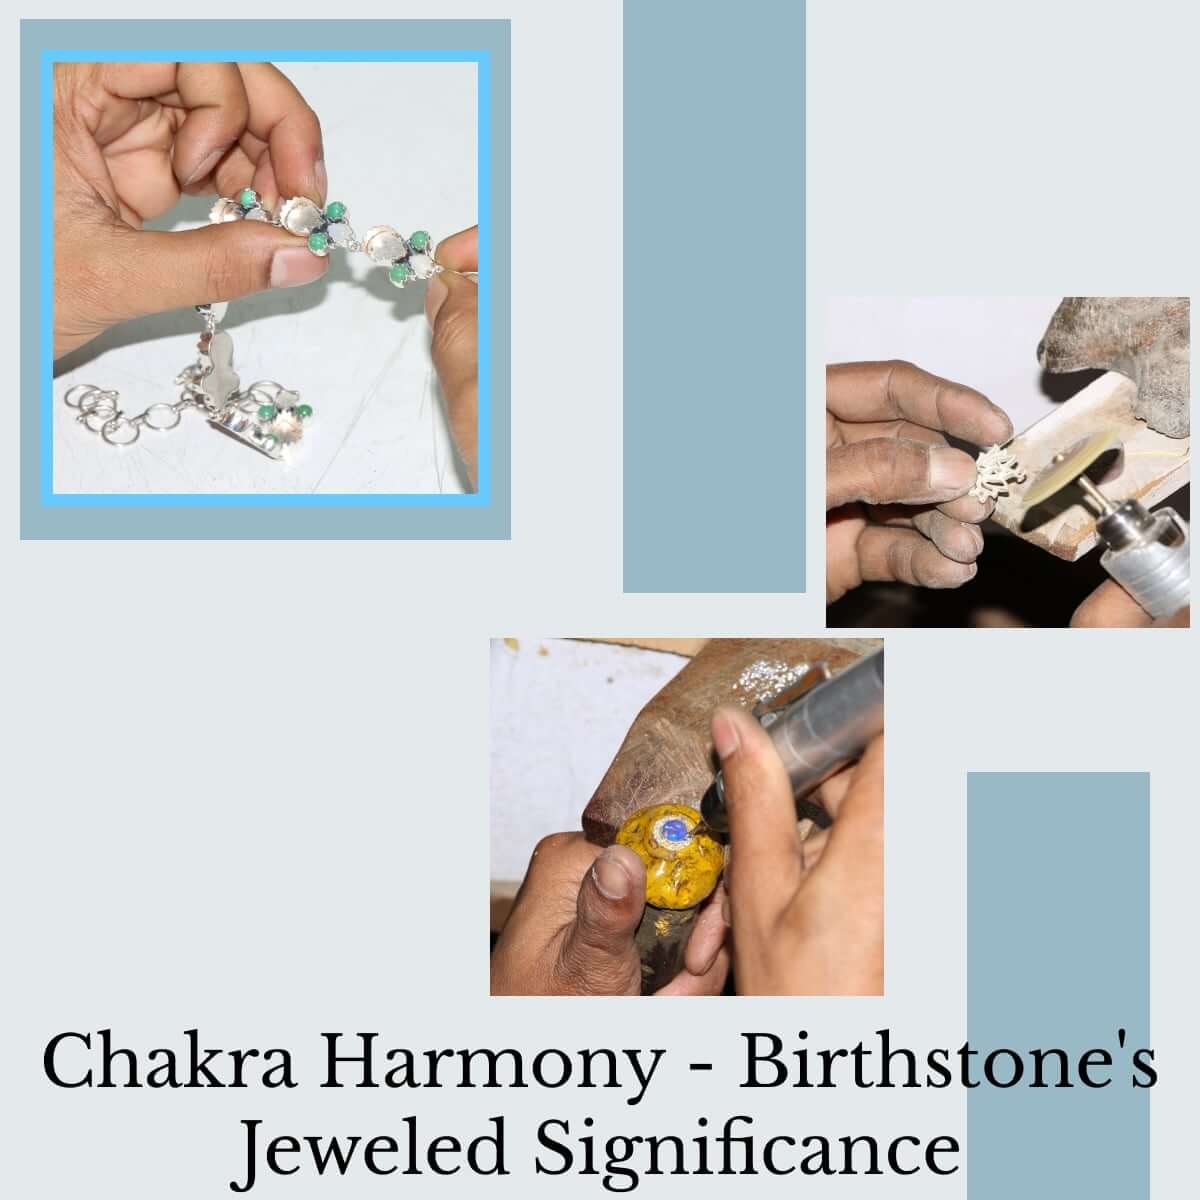 Chakra and Birthstone Jewelry: Designs of Significance